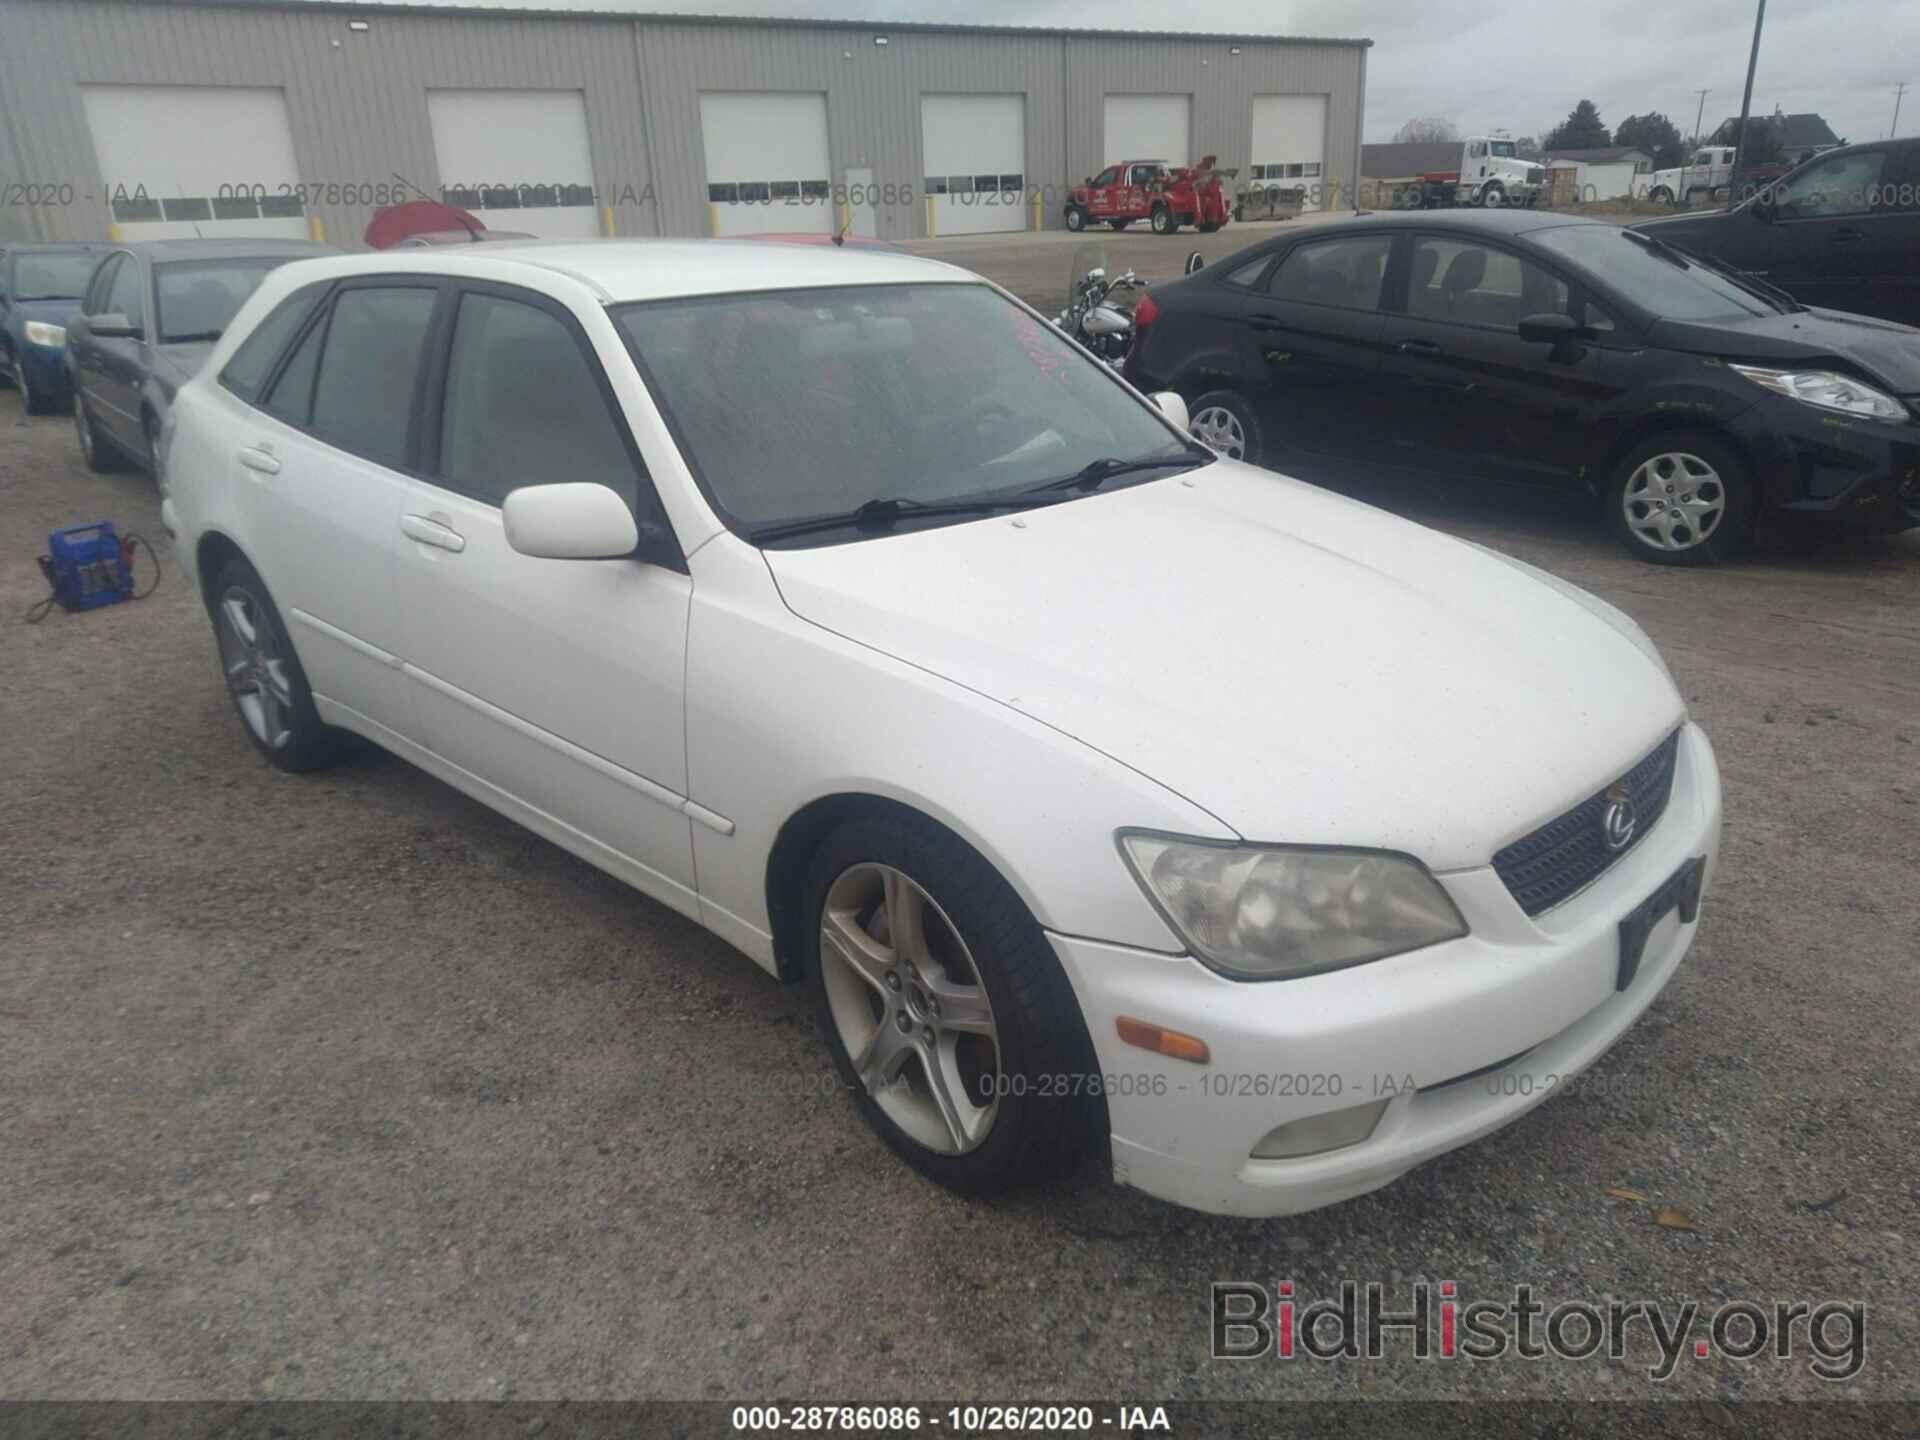 Photo JTHED192220044832 - LEXUS IS 300 2002